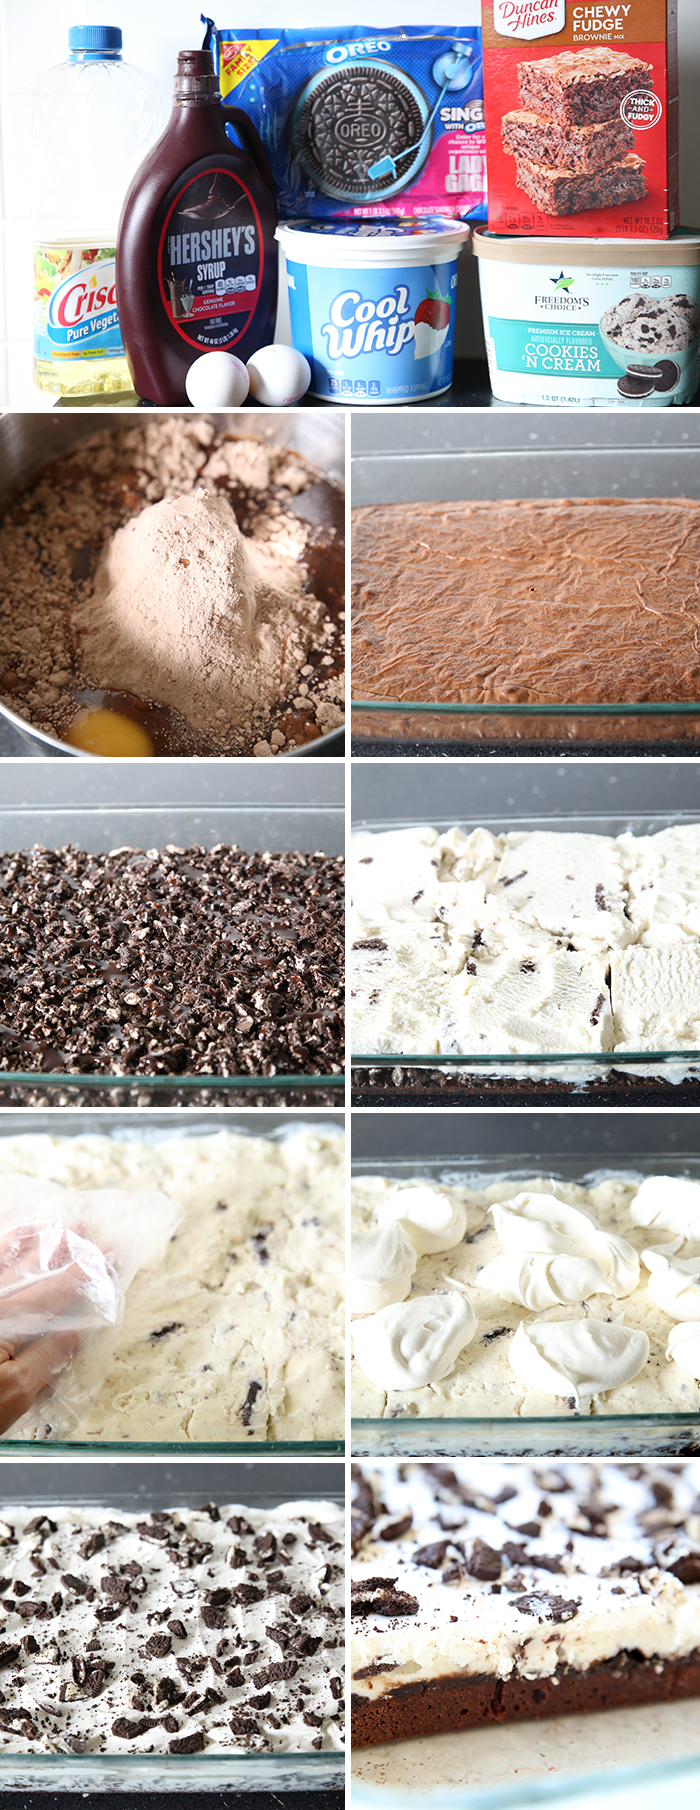 9-photo picture collage of step-by-step pictures of how to make Brownie Oreo Ice Cream Cake.